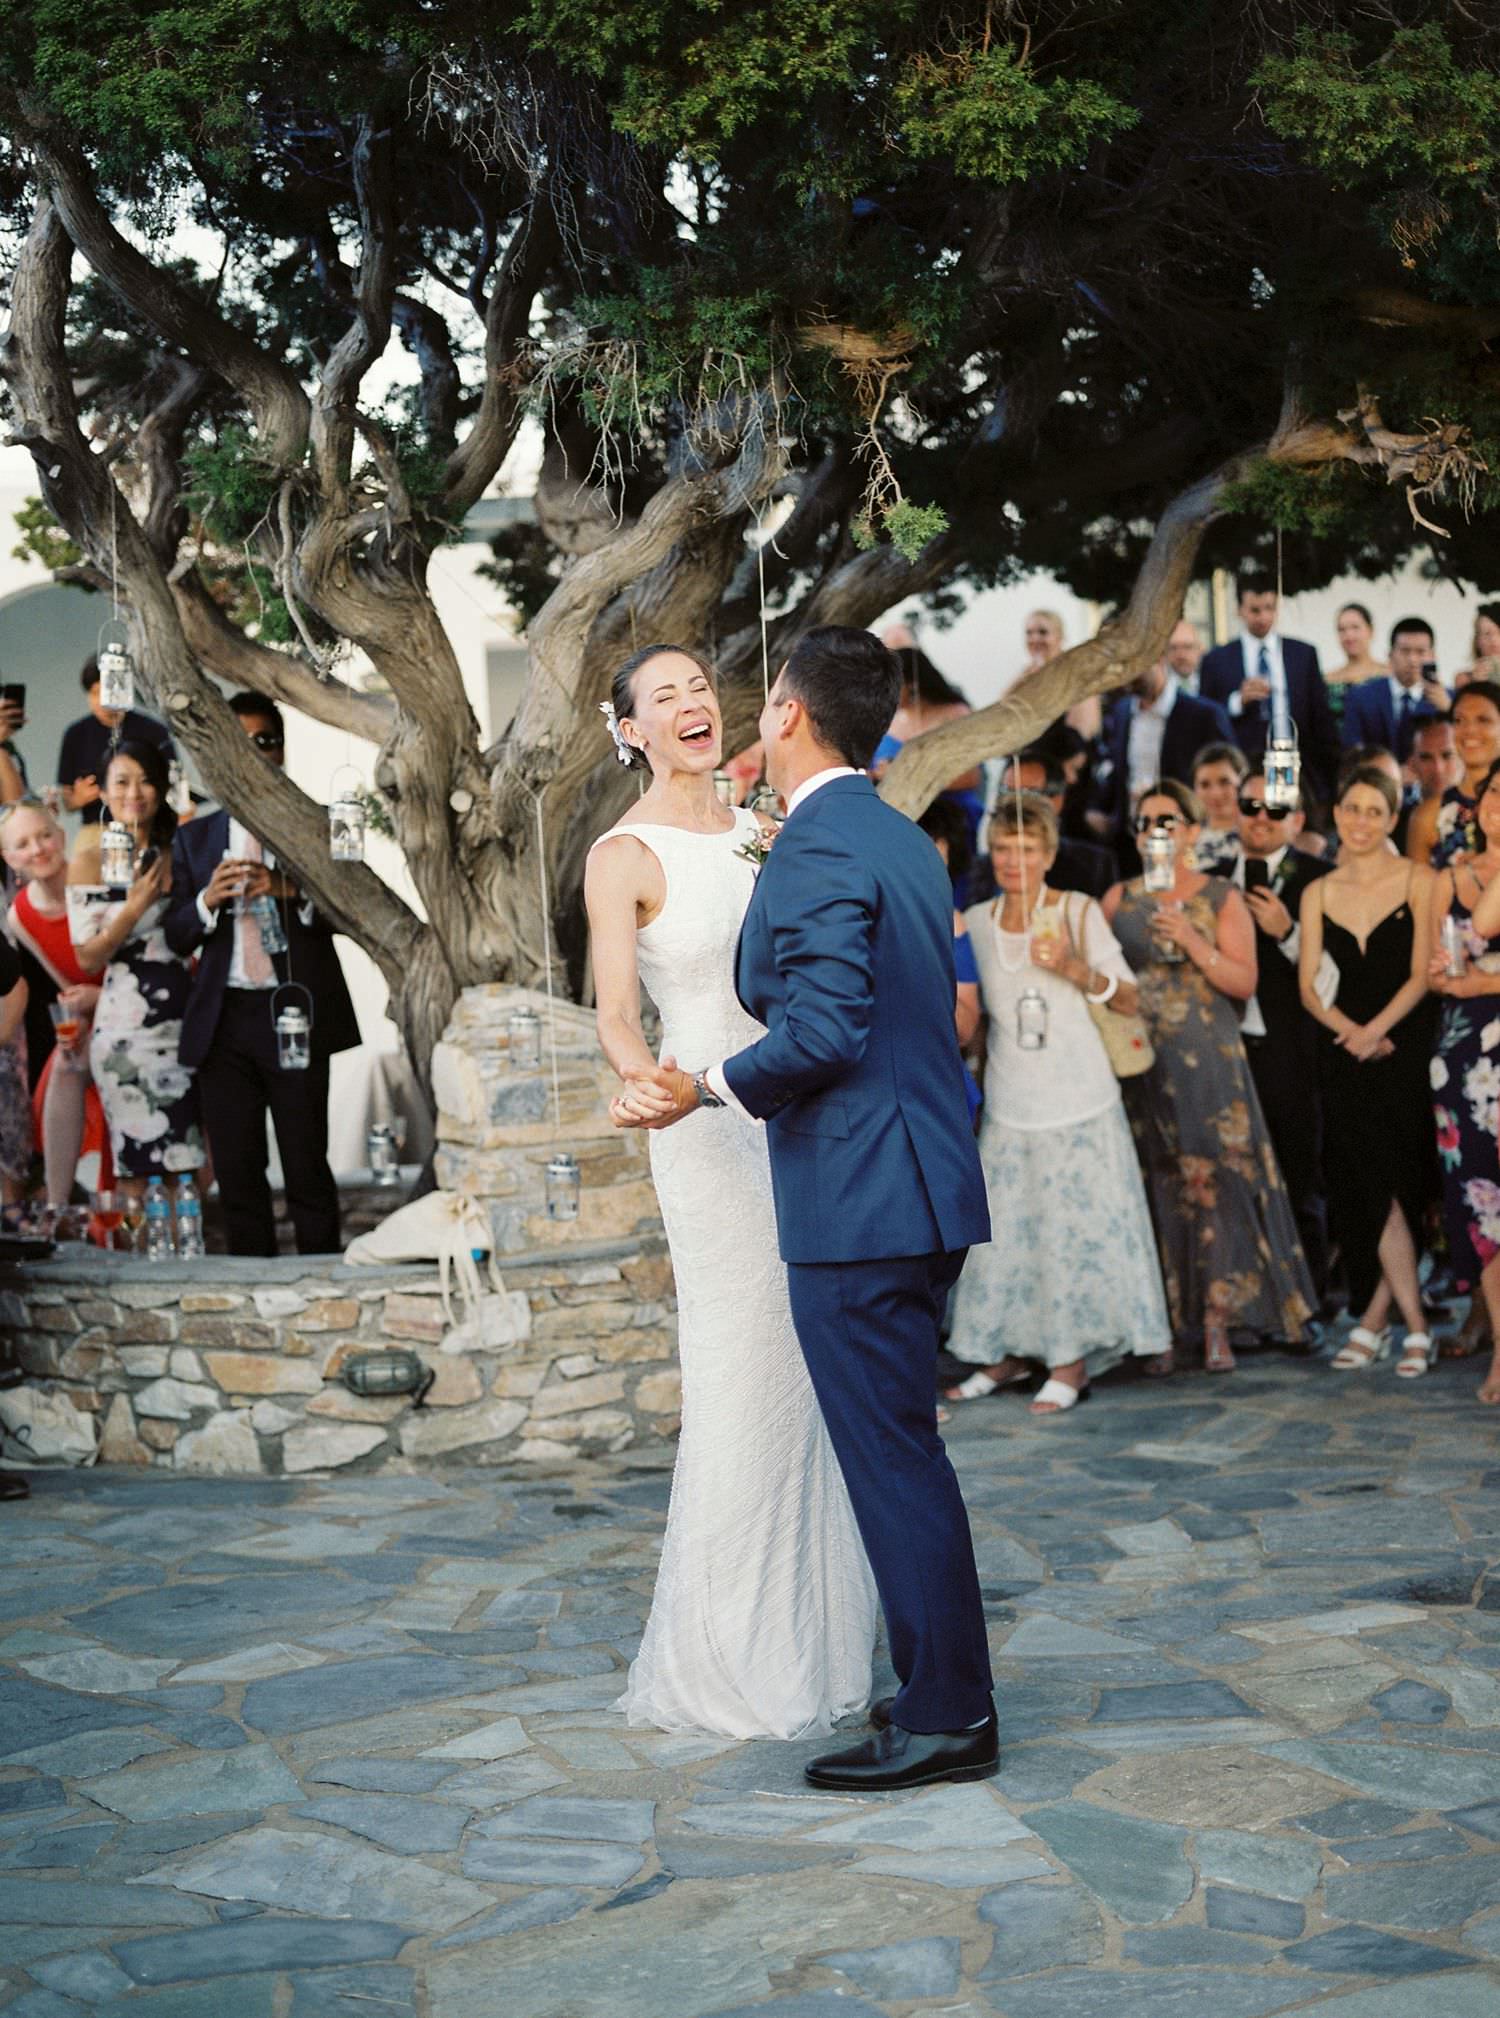 10 Amazing Tips To Get The Most Out Of Your Wedding Day